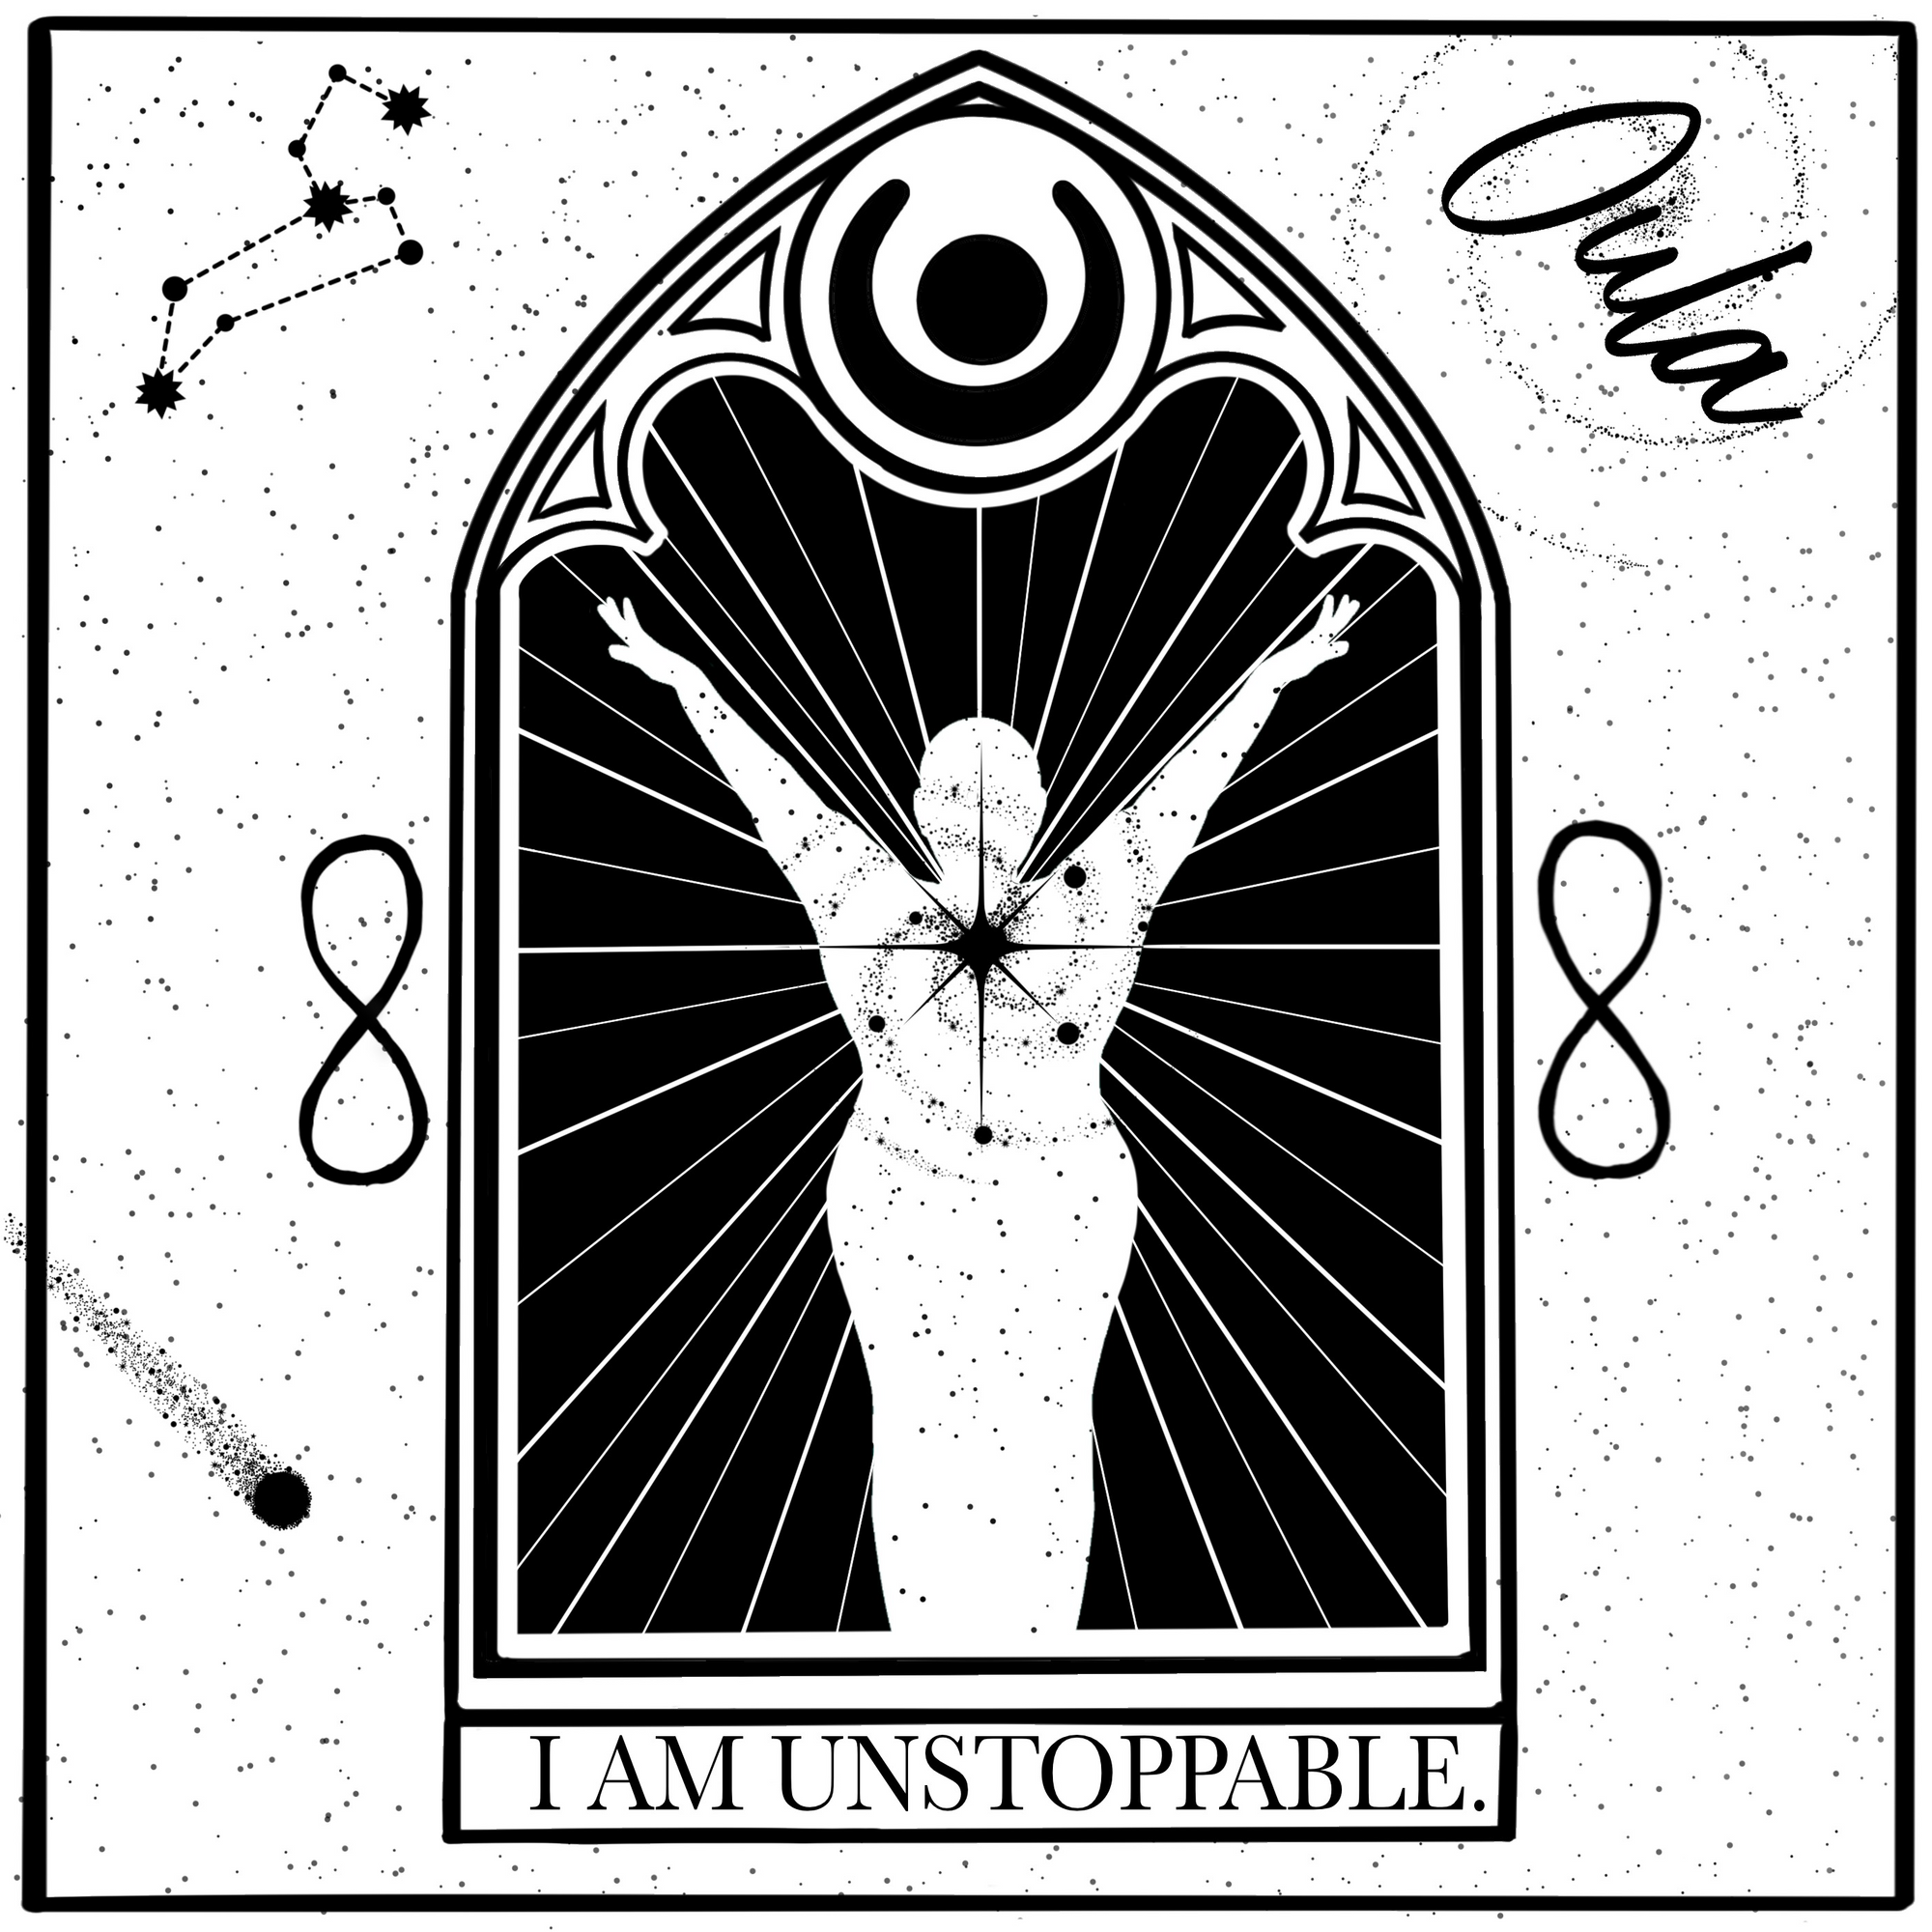 I Am Unstoppable - January